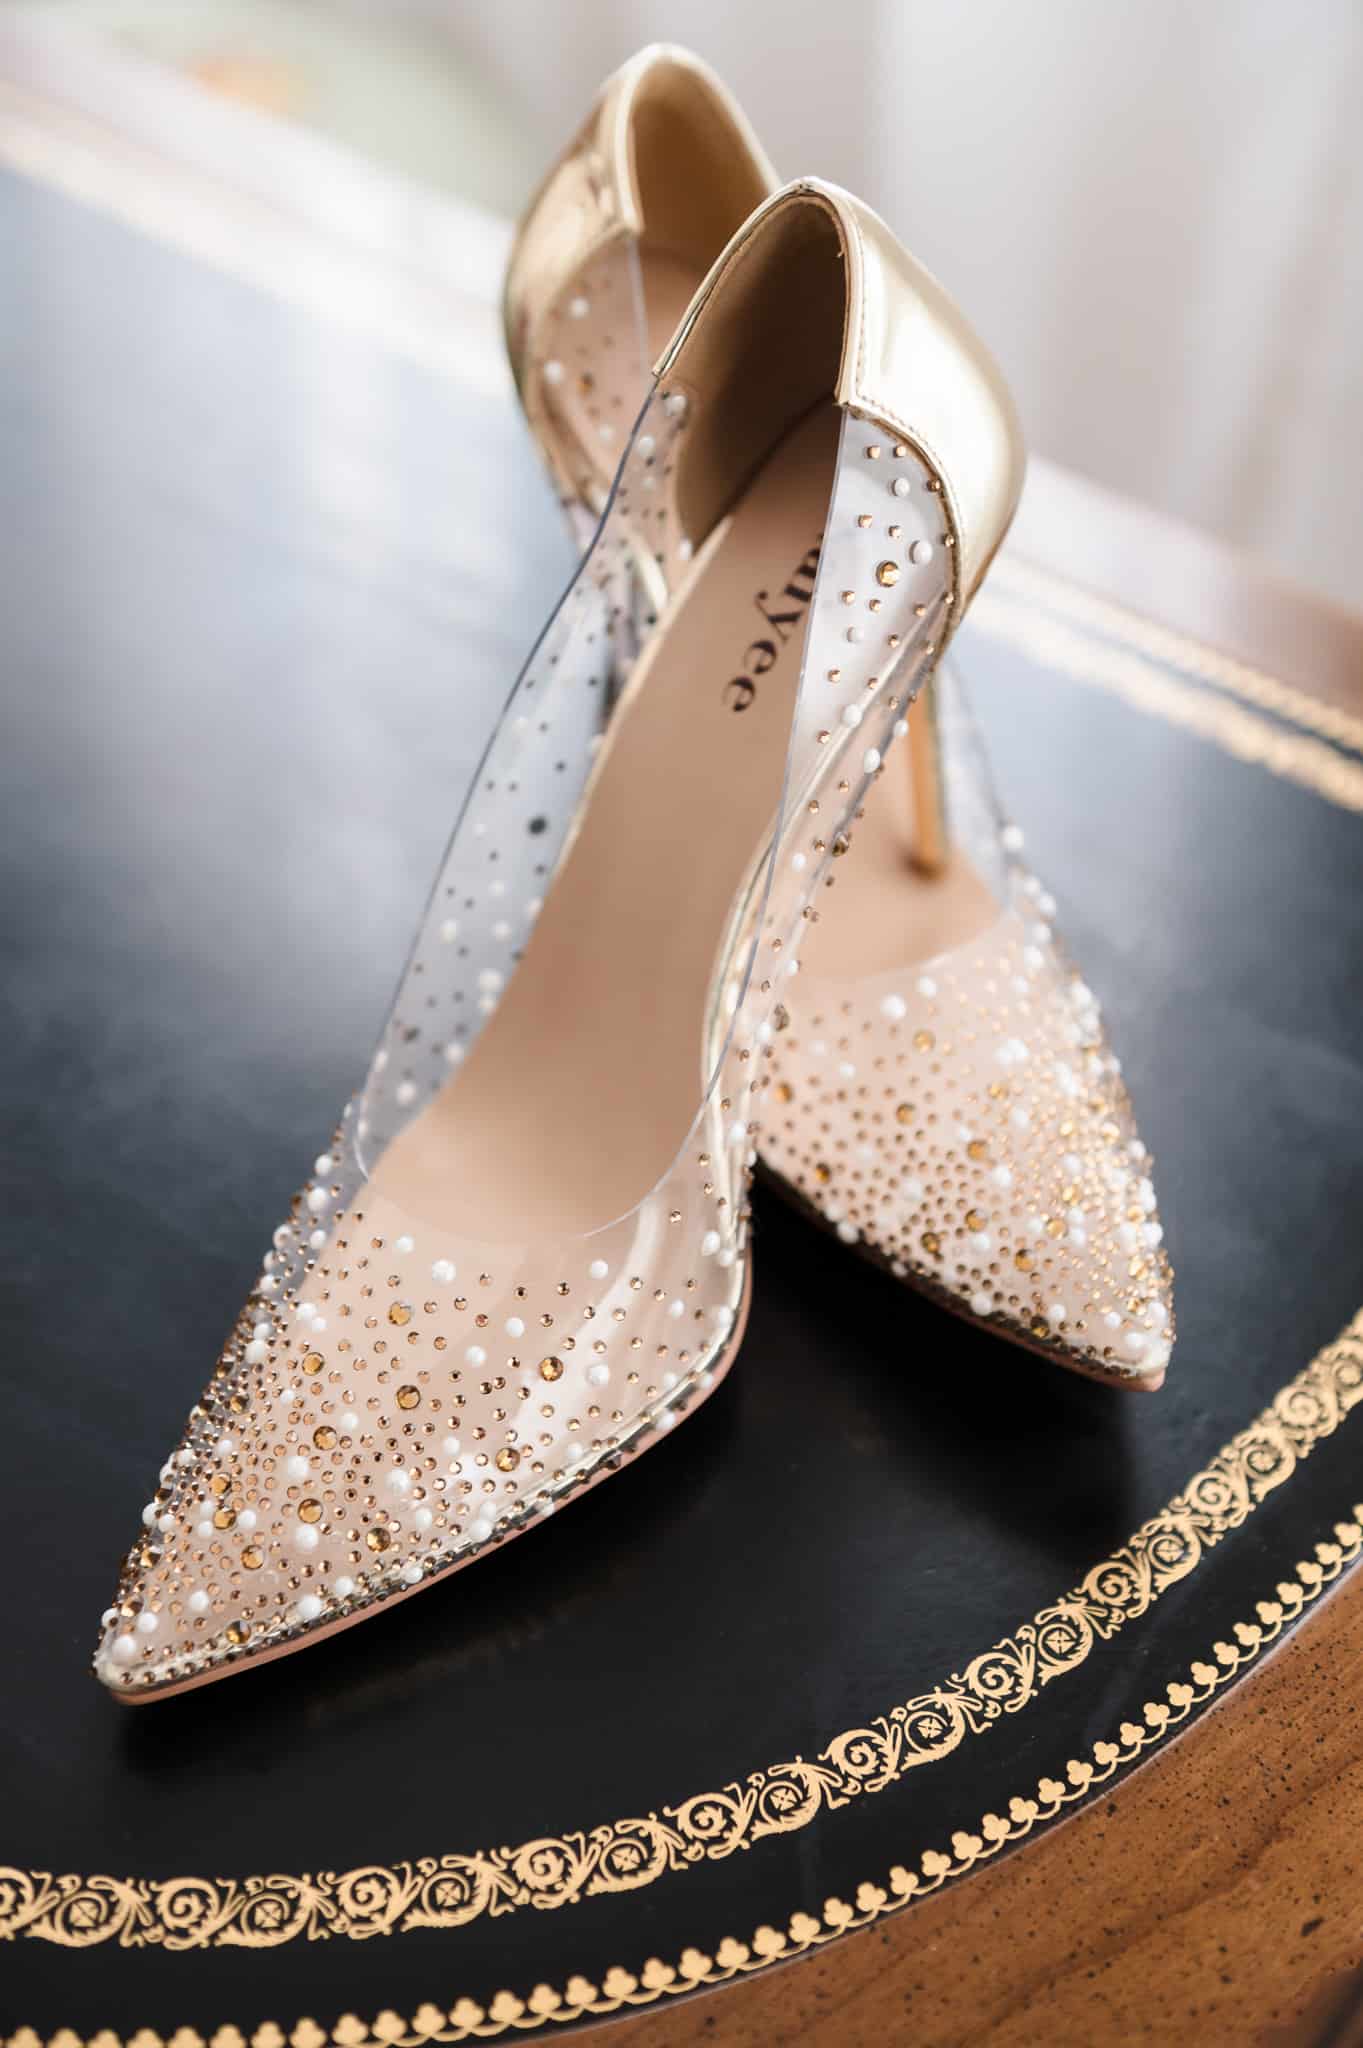 A pair of pearl and gold-sequined studded translucent shoes in a pump style.